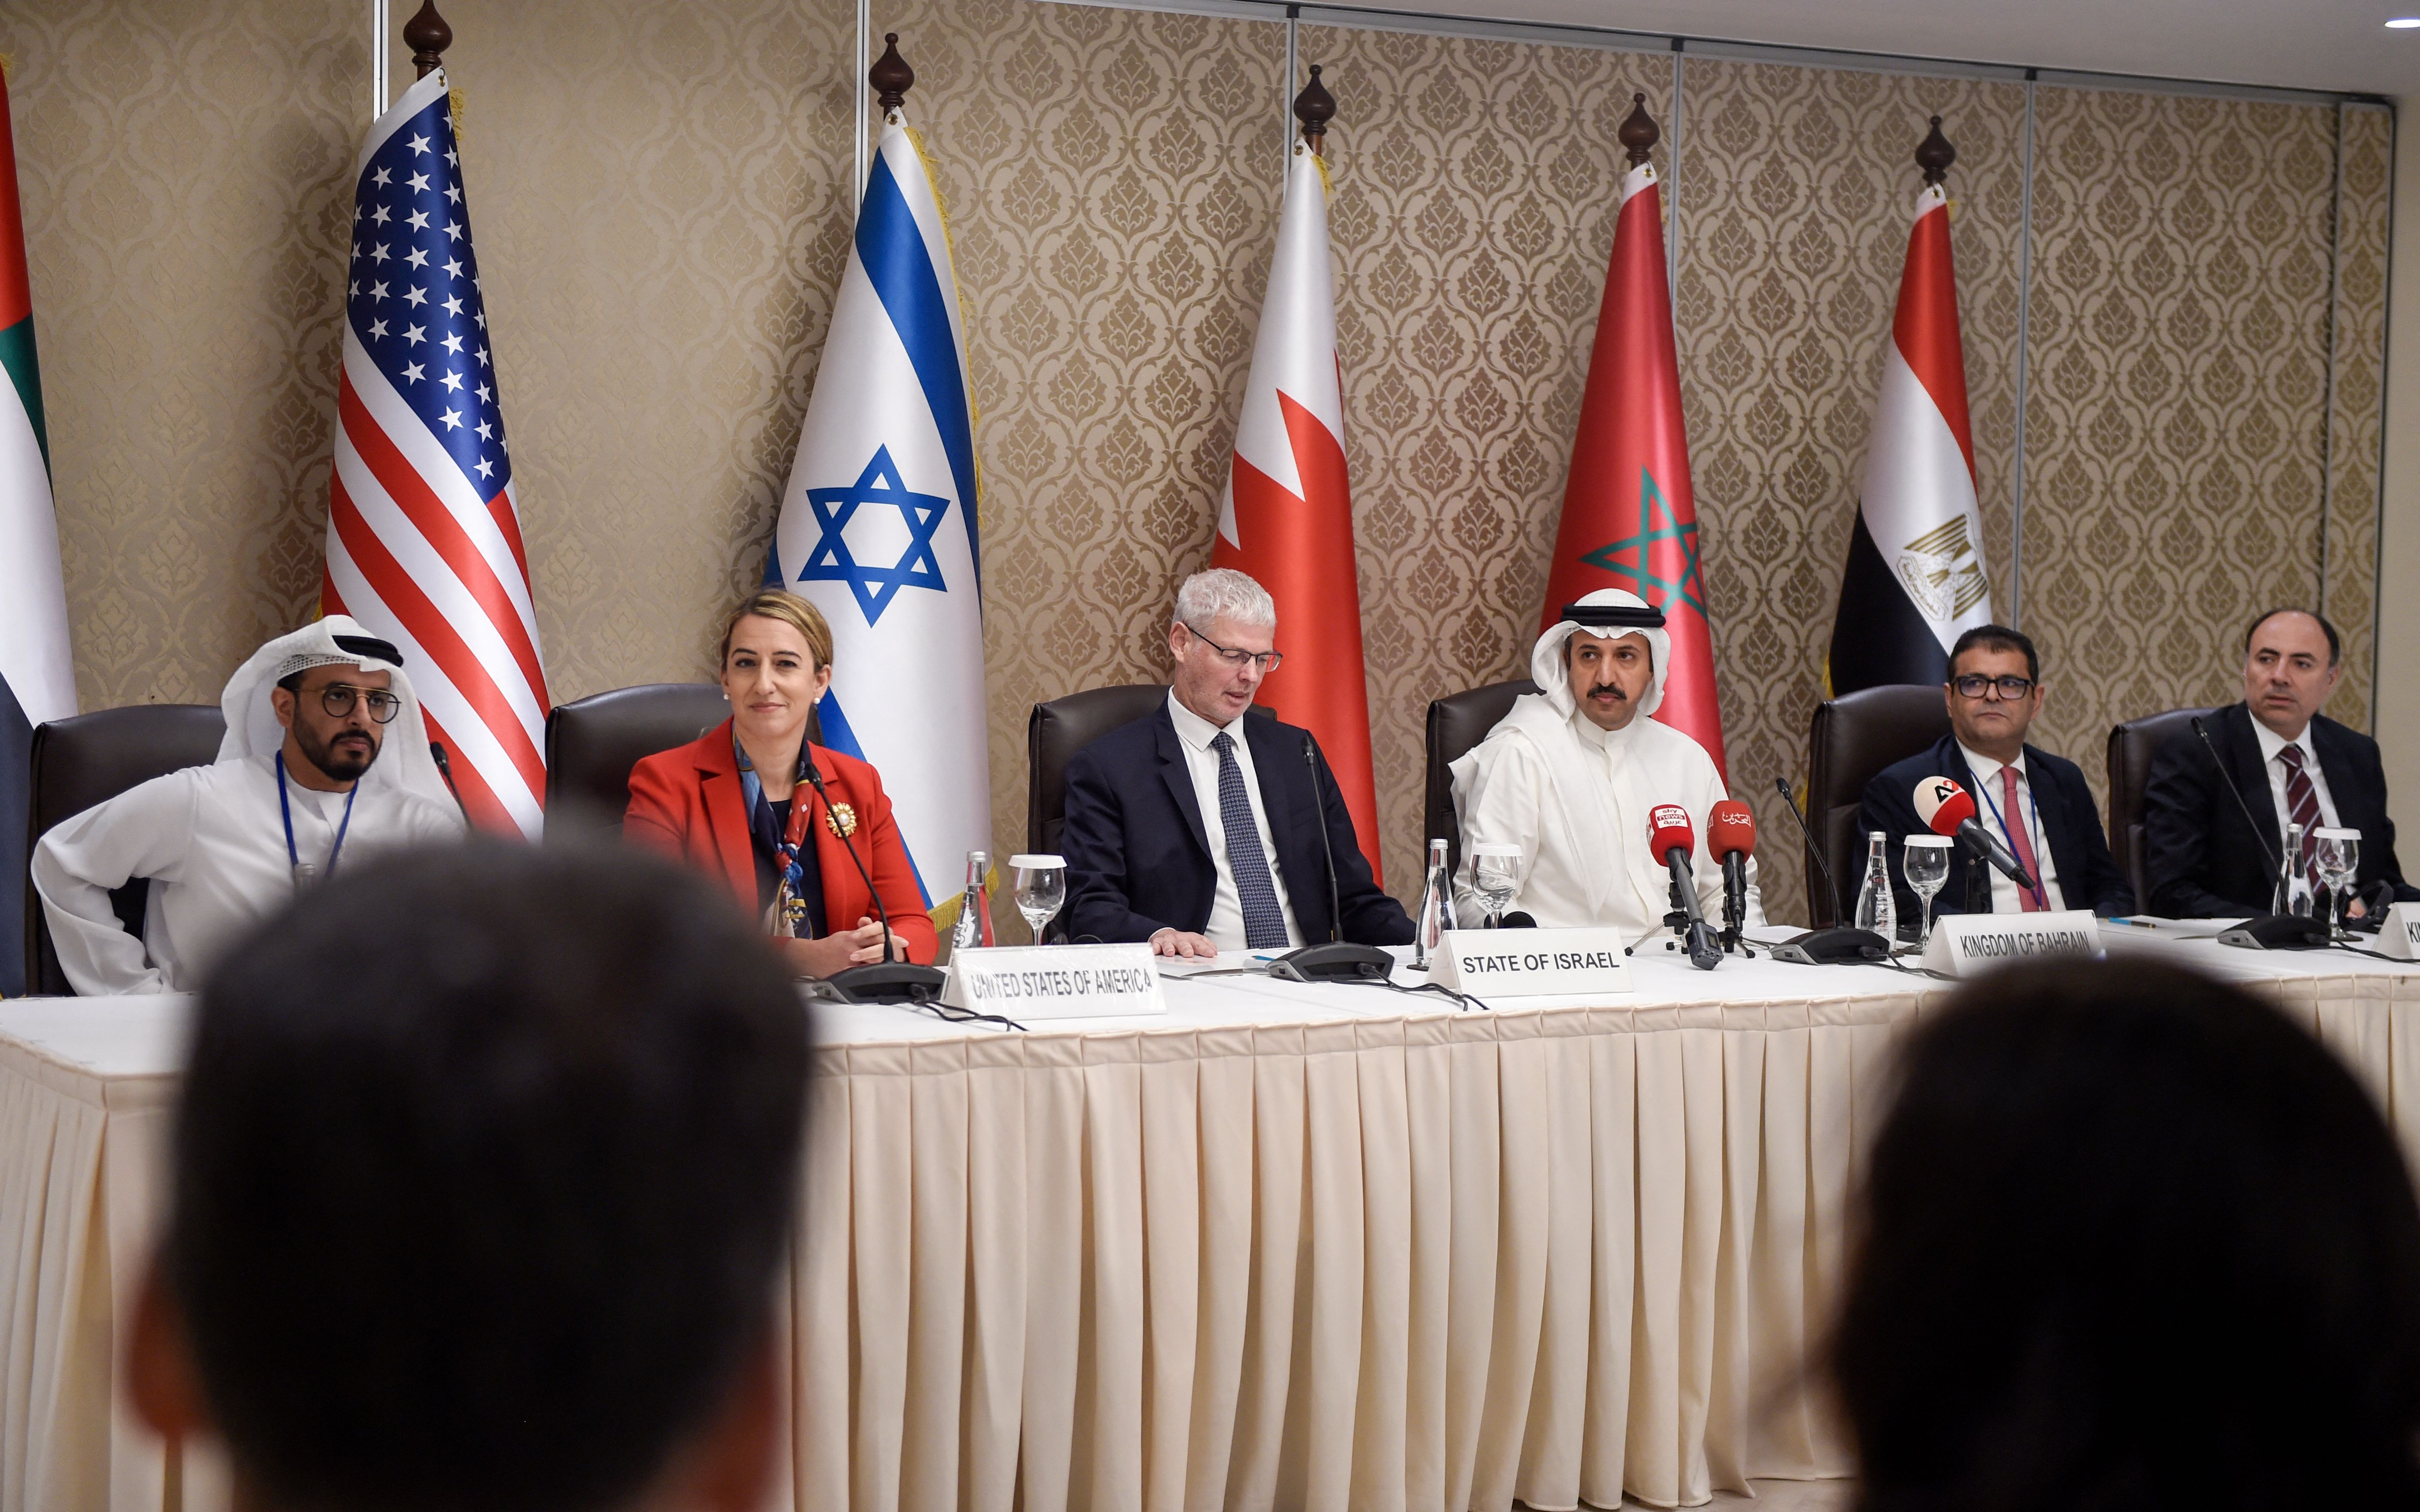 Officials from the UAE, the U.S., Israel, Bahrain, Morocco, and Egypt hold a joint press conference for the Negev Forum’s first Steering Committee meeting in Zallaq, Bahrain on June 27, 2022. Photo by MAZEN MAHDI/AFP via Getty Images.